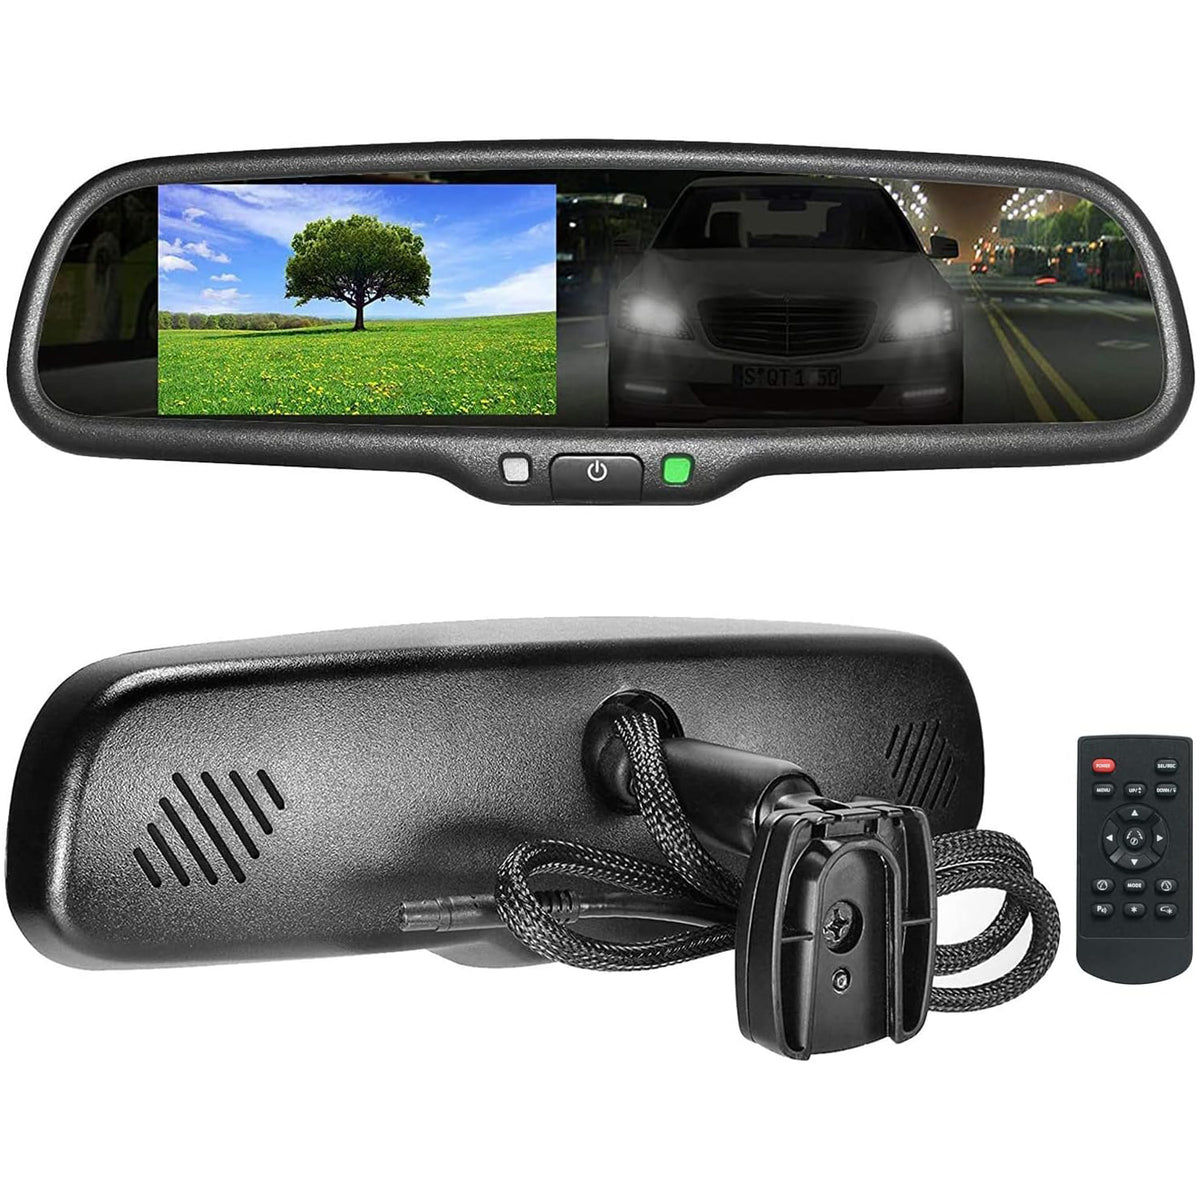  Rear View Mirror Camera with 4.3” Monitor, Super Night Vision  OEM Backup Camera Mirror with IP 68 Waterproof Back Up Camera for Car,  Rearview Mirror for Parking & Driving Safety AUTO-VOX